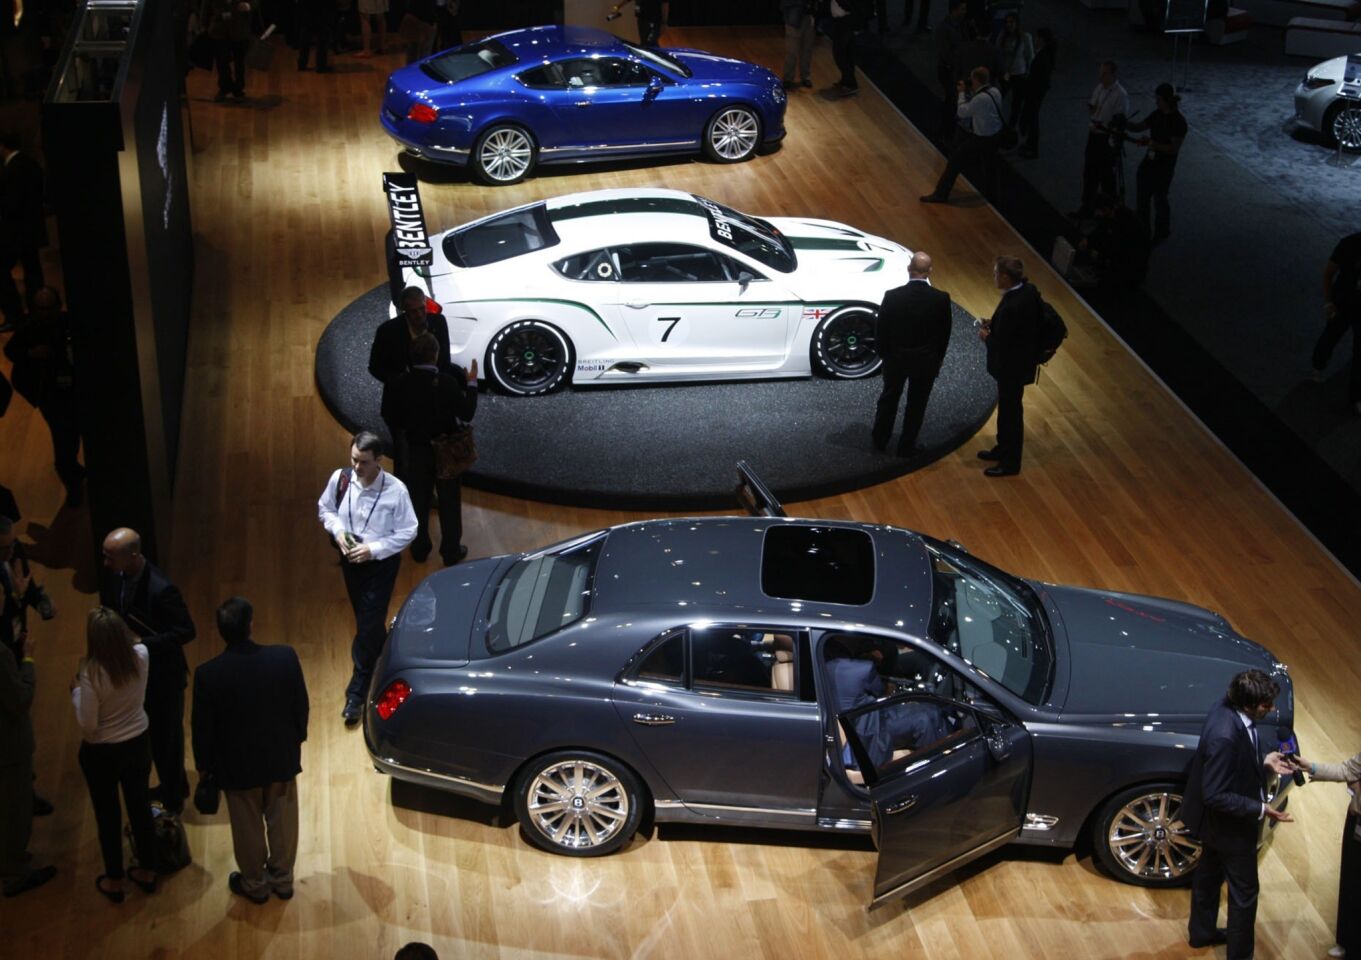 The Bentley exhibit displays the the 2013 Bentley Mulsanne (gray), the Bentley Continental GT3 concept race car (white) and the 2013 Bentley GT Speed.